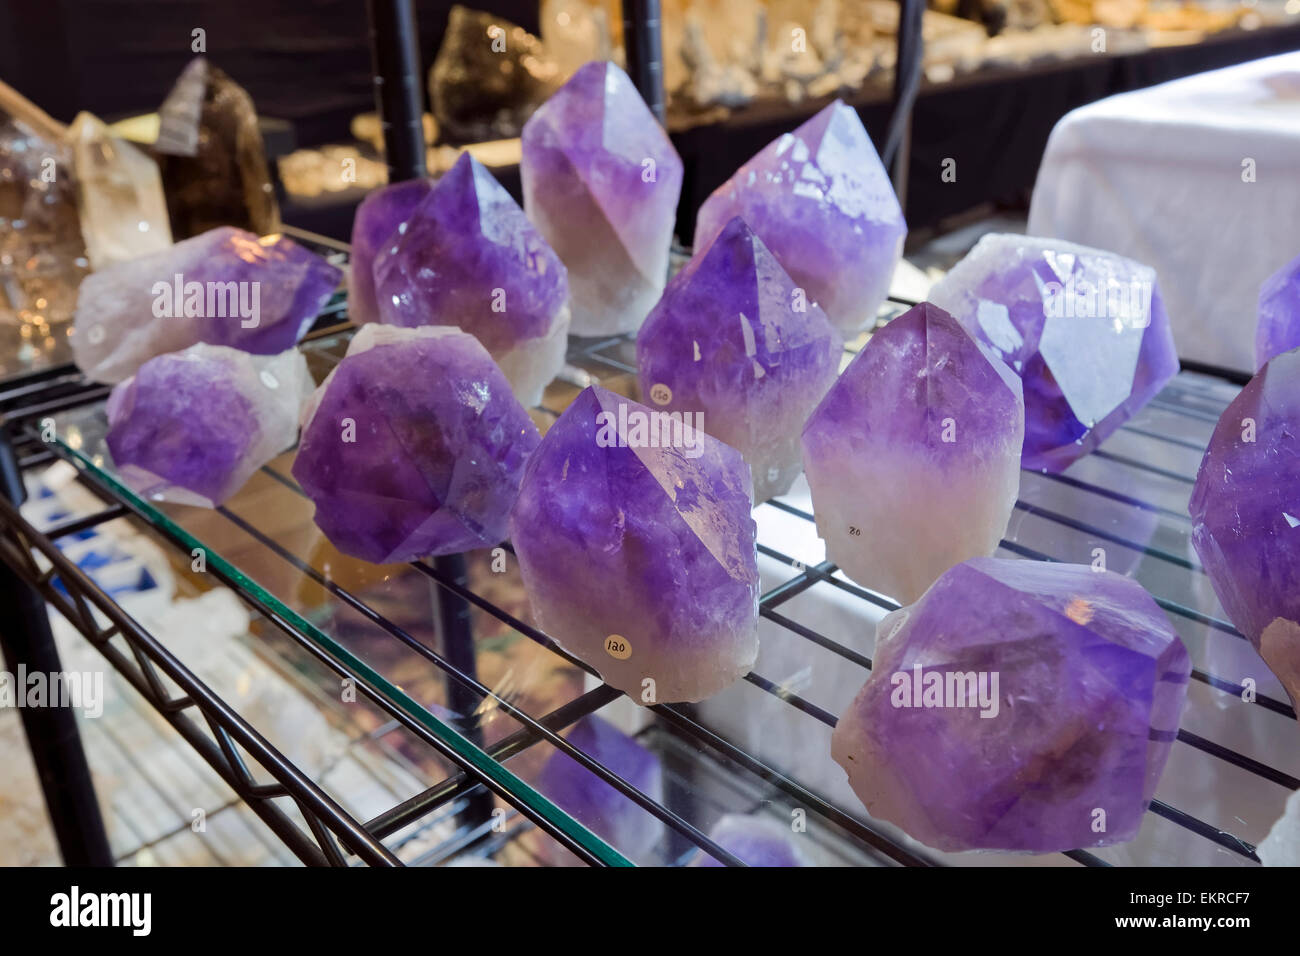 Amethyst crystals for sale, Tucson Gem and Mineral Show, Tucson, Arizona Stock Photo